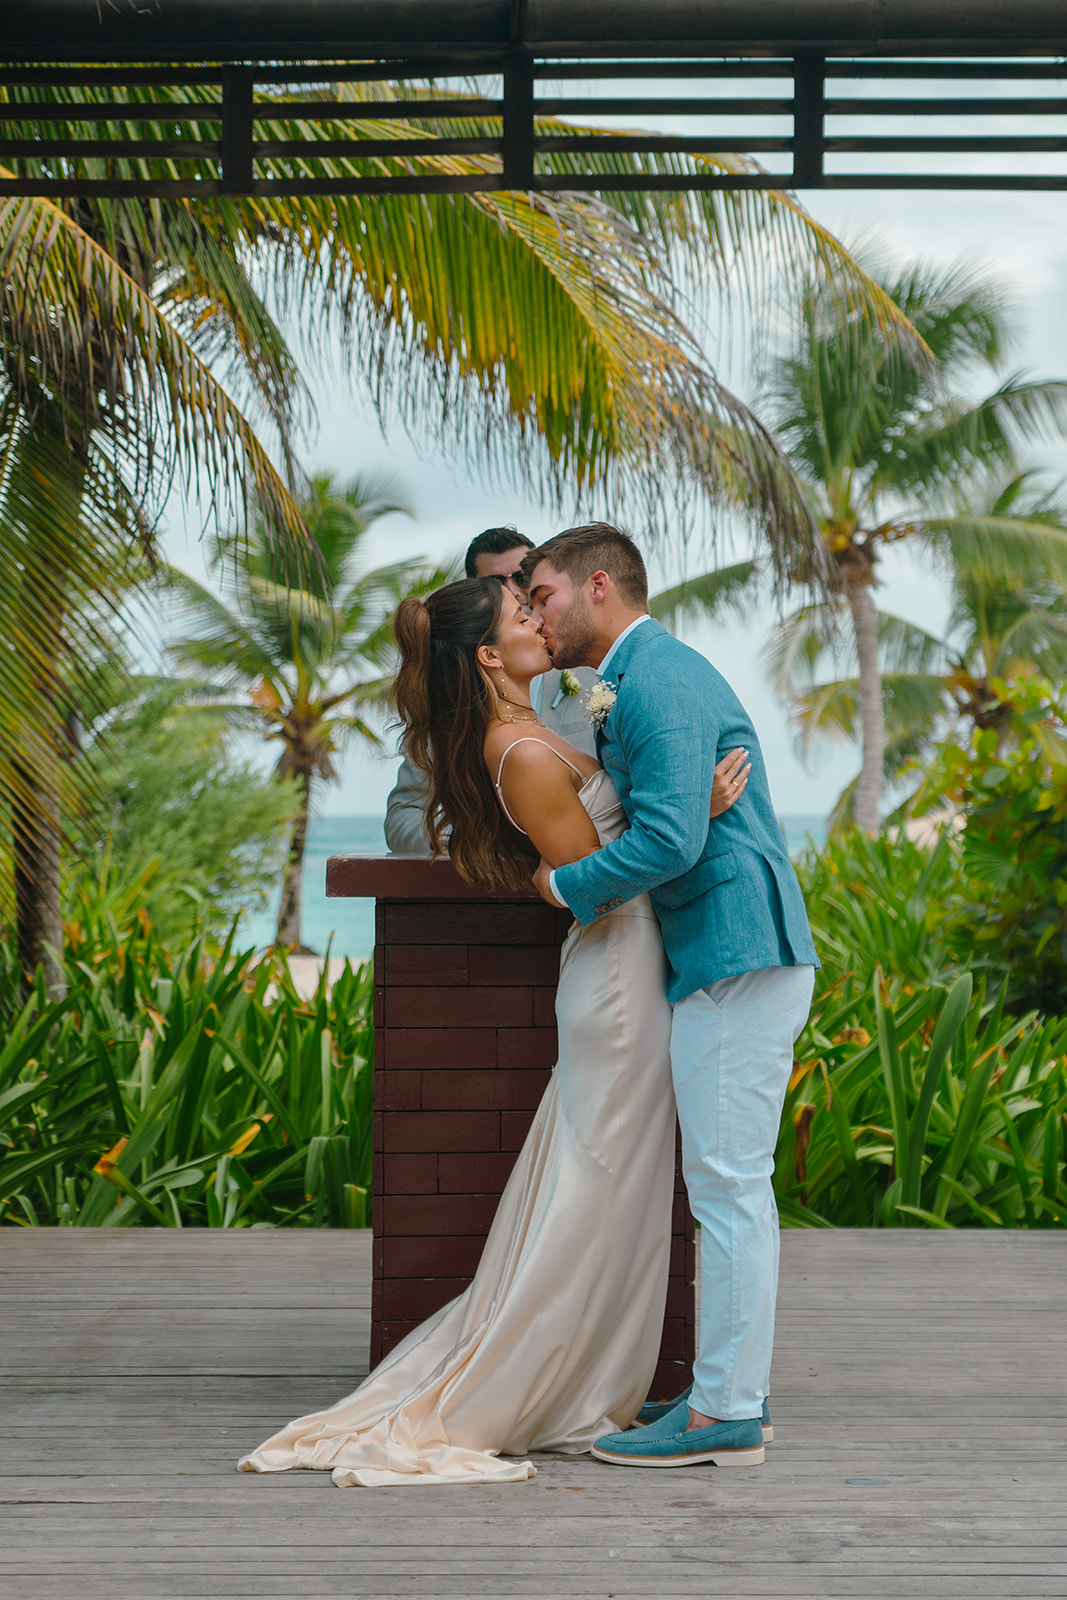 Bride and groom first kiss with palm trees and ocean in background